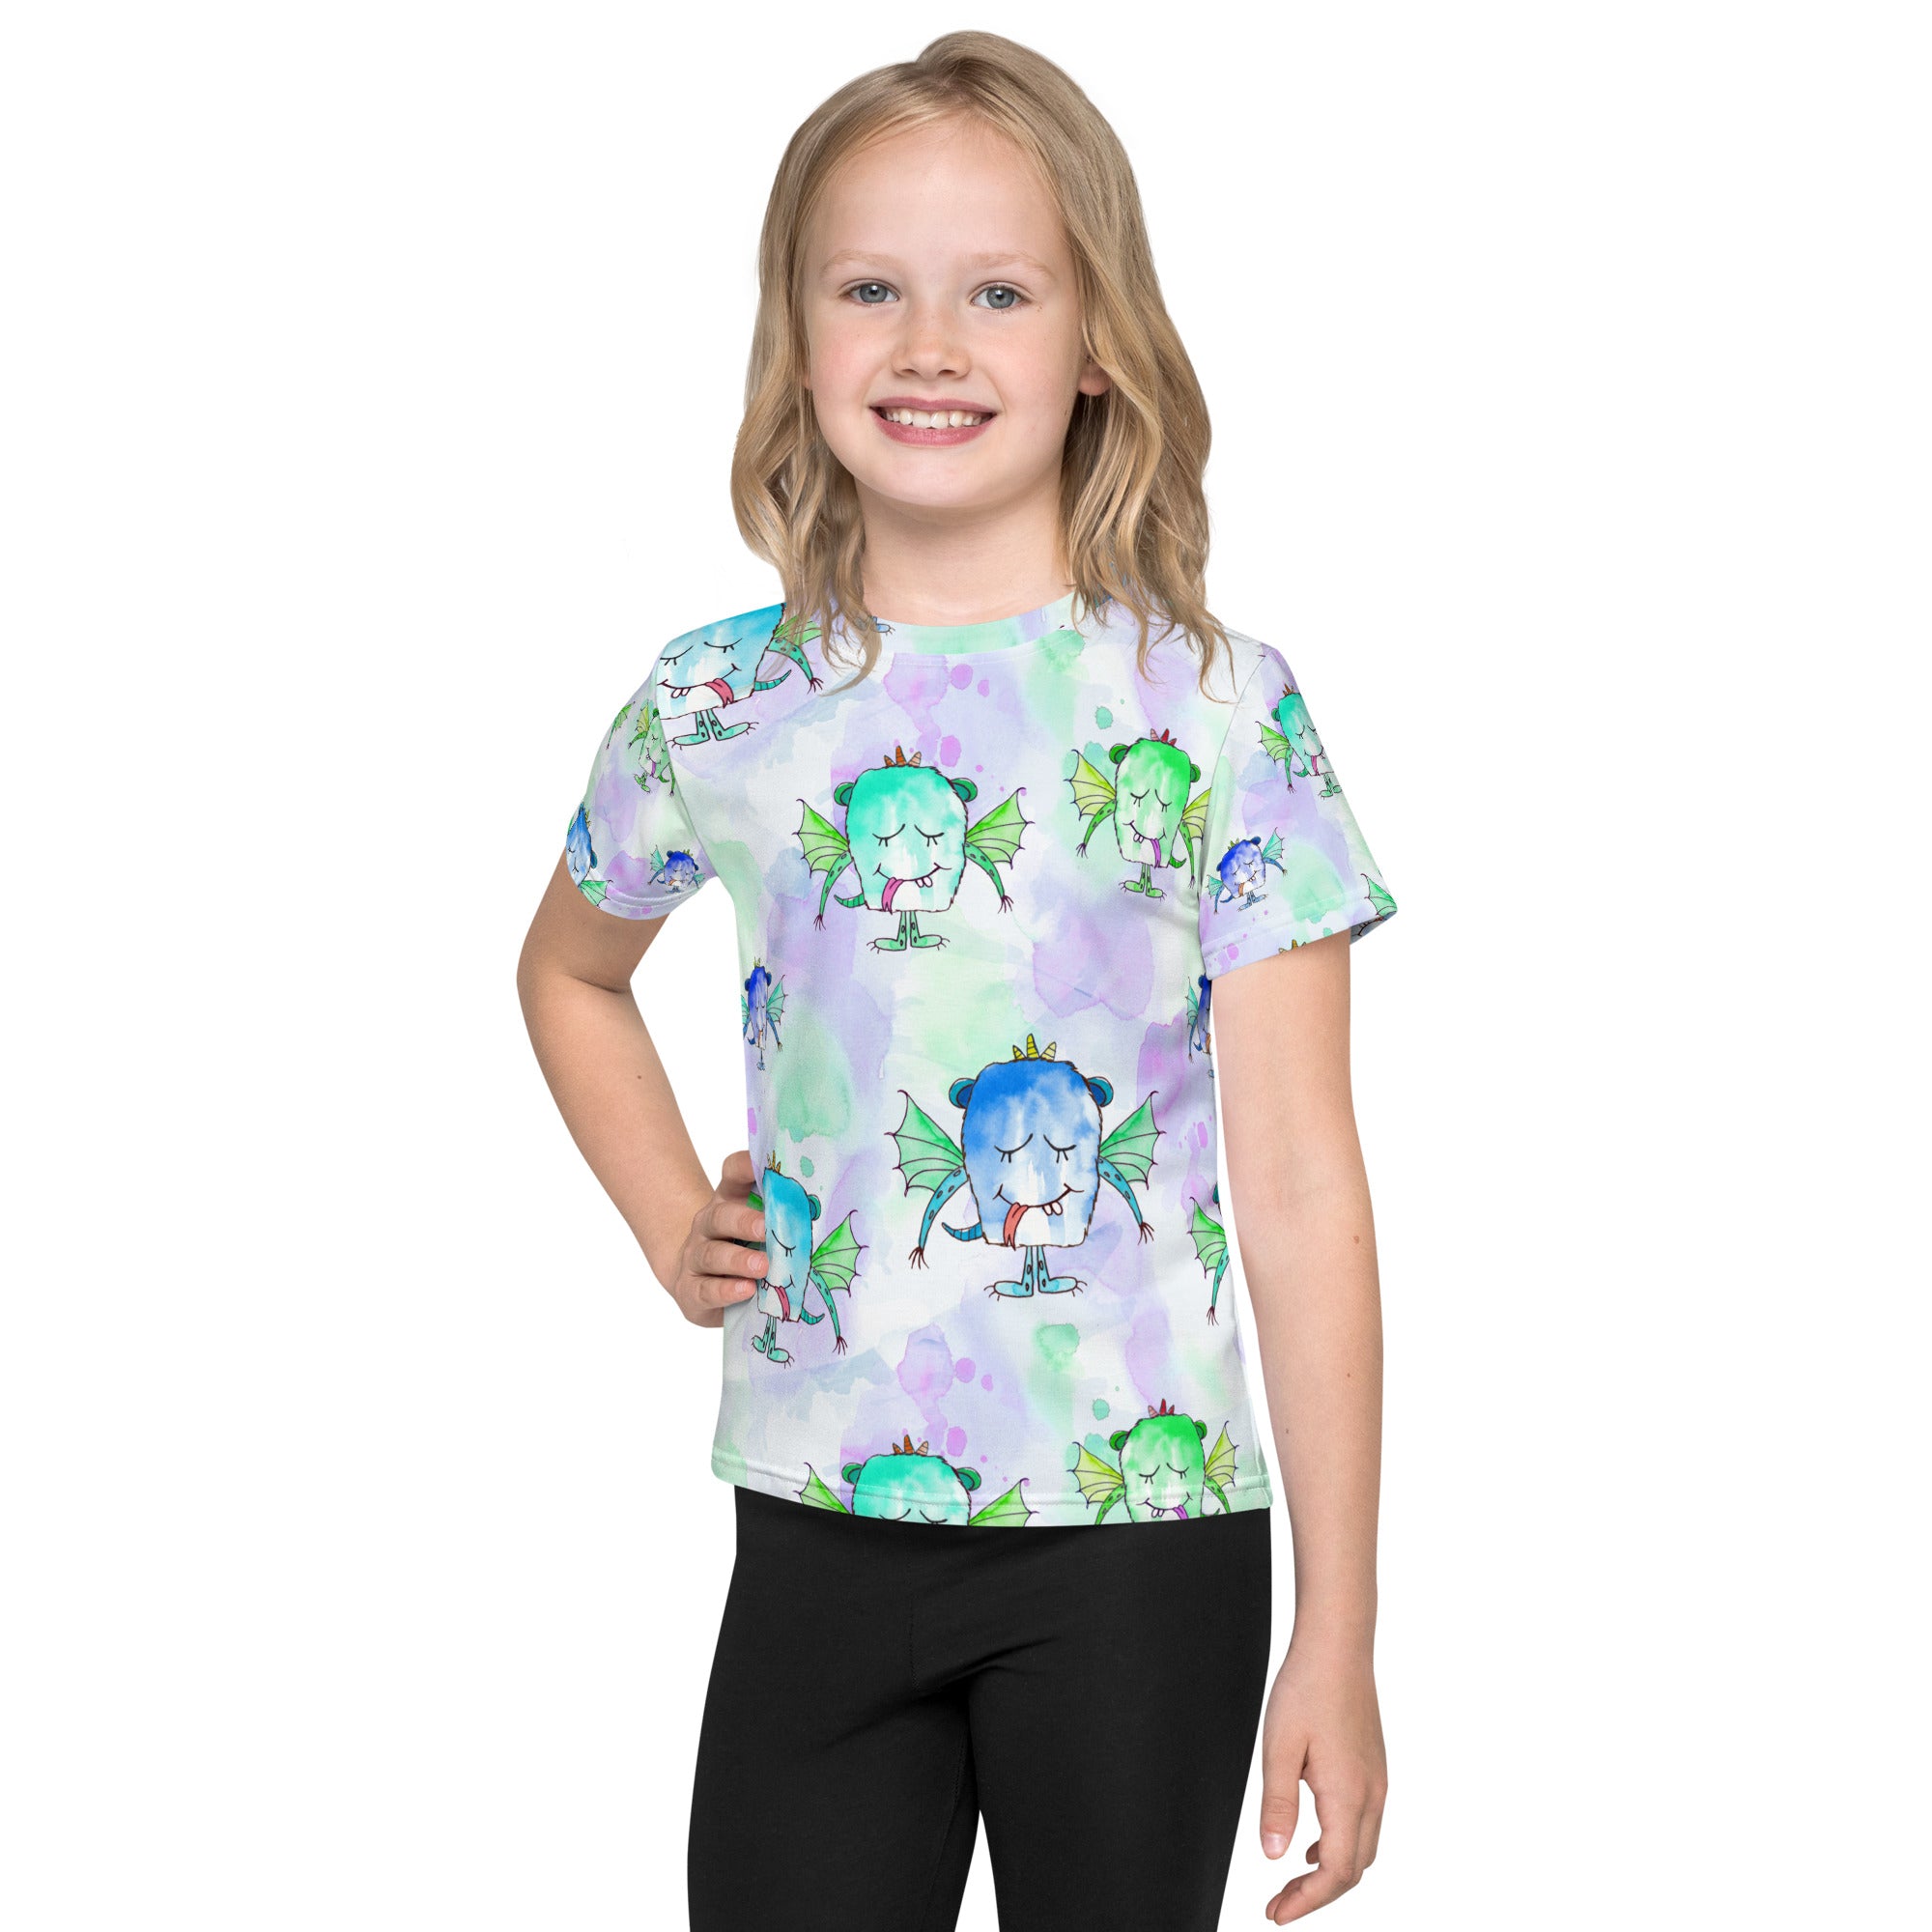 Youth-Kids crew neck t-shirt, colorful design, comfortable t shirt